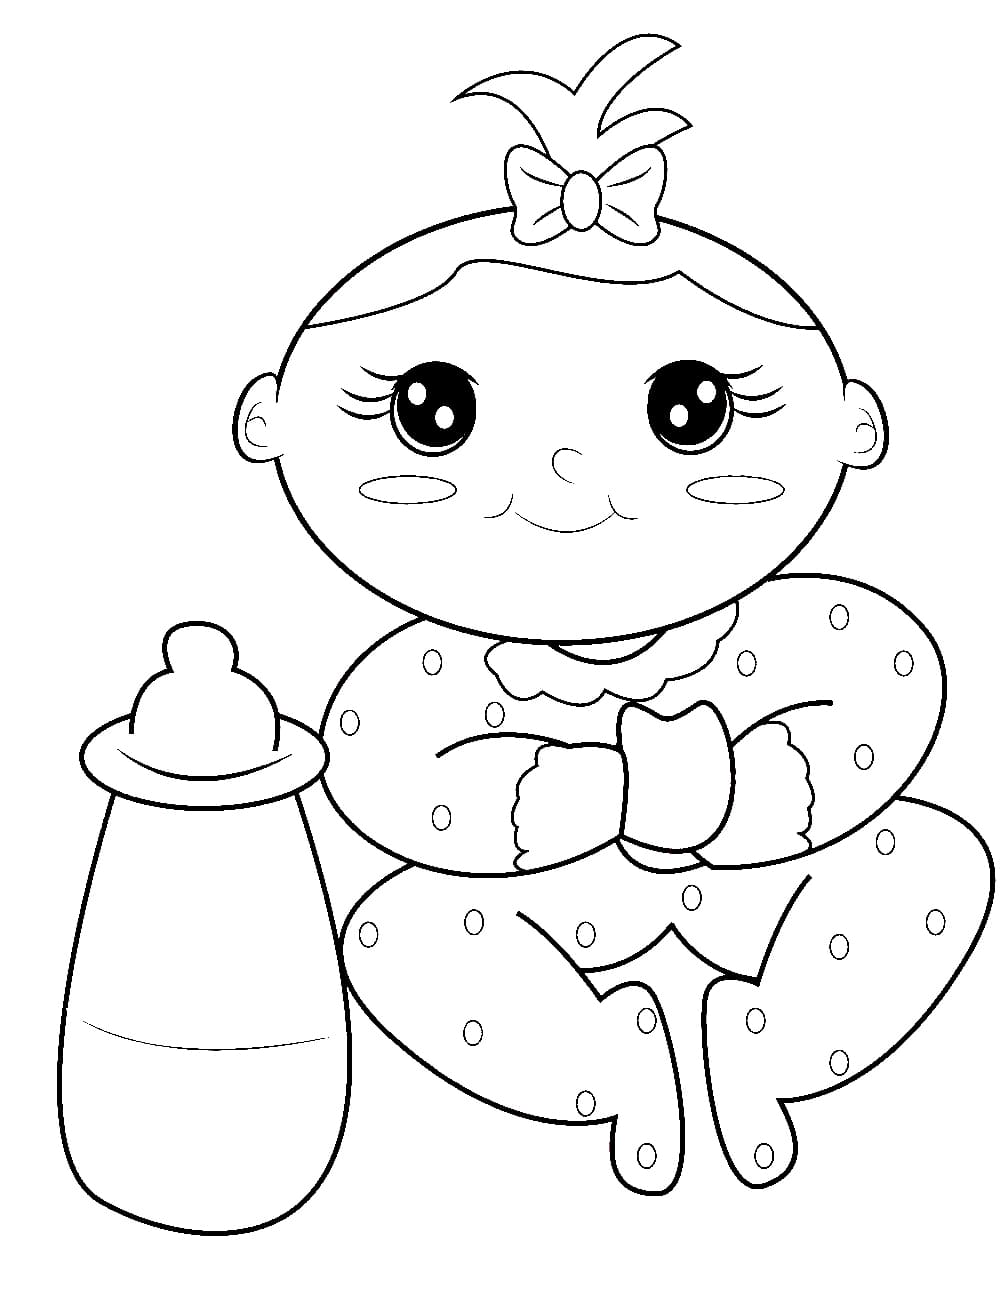 Baby Girl and Bottle Coloring Page - Free Printable Coloring Pages for Kids